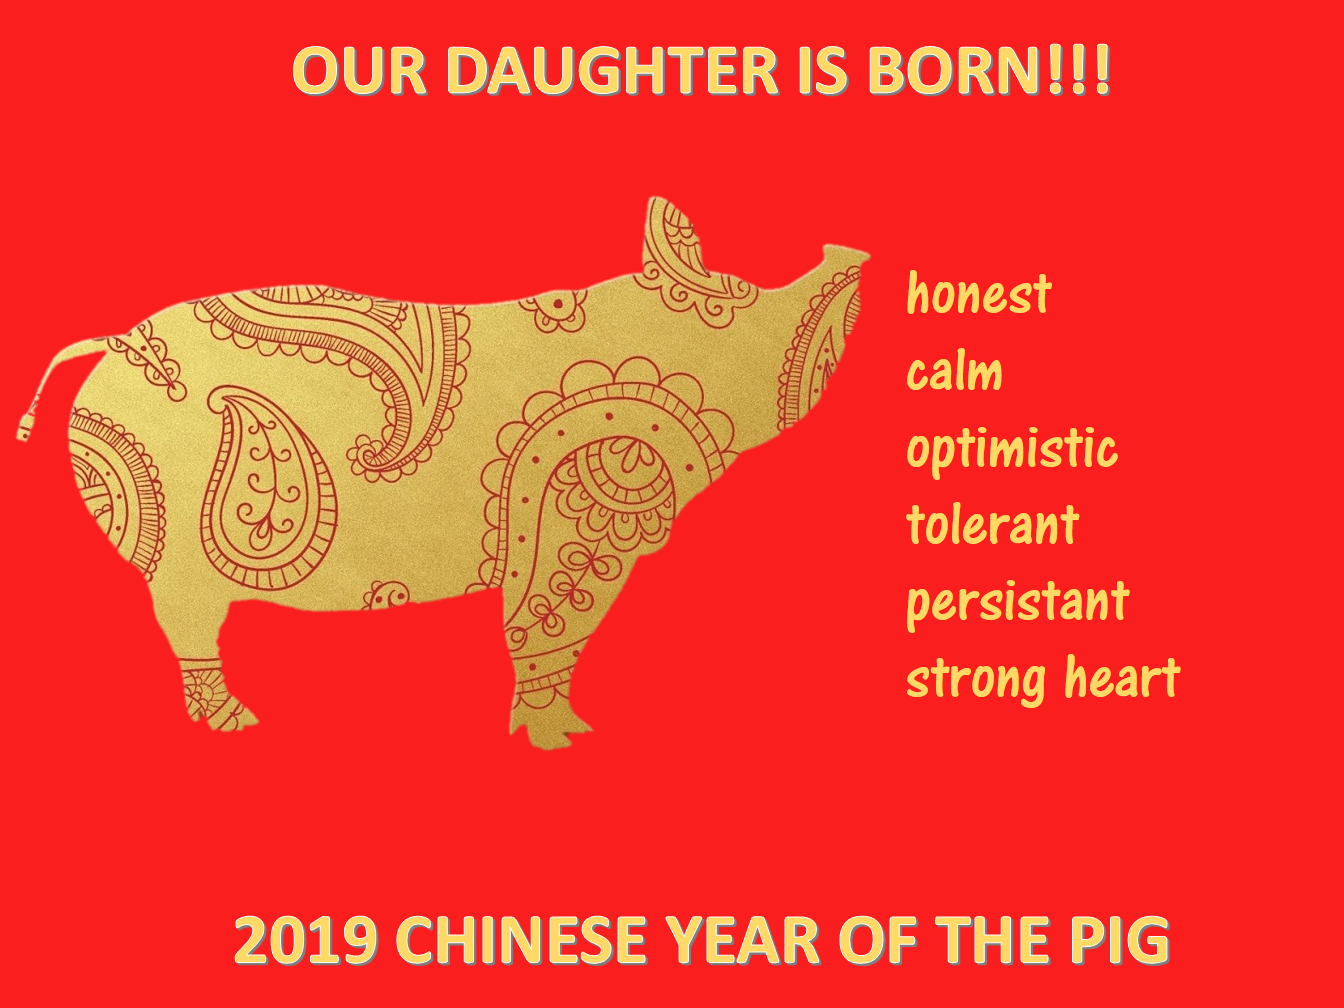 chinese new year daughter is born 2019 year pig voorbeeld afbeelding 